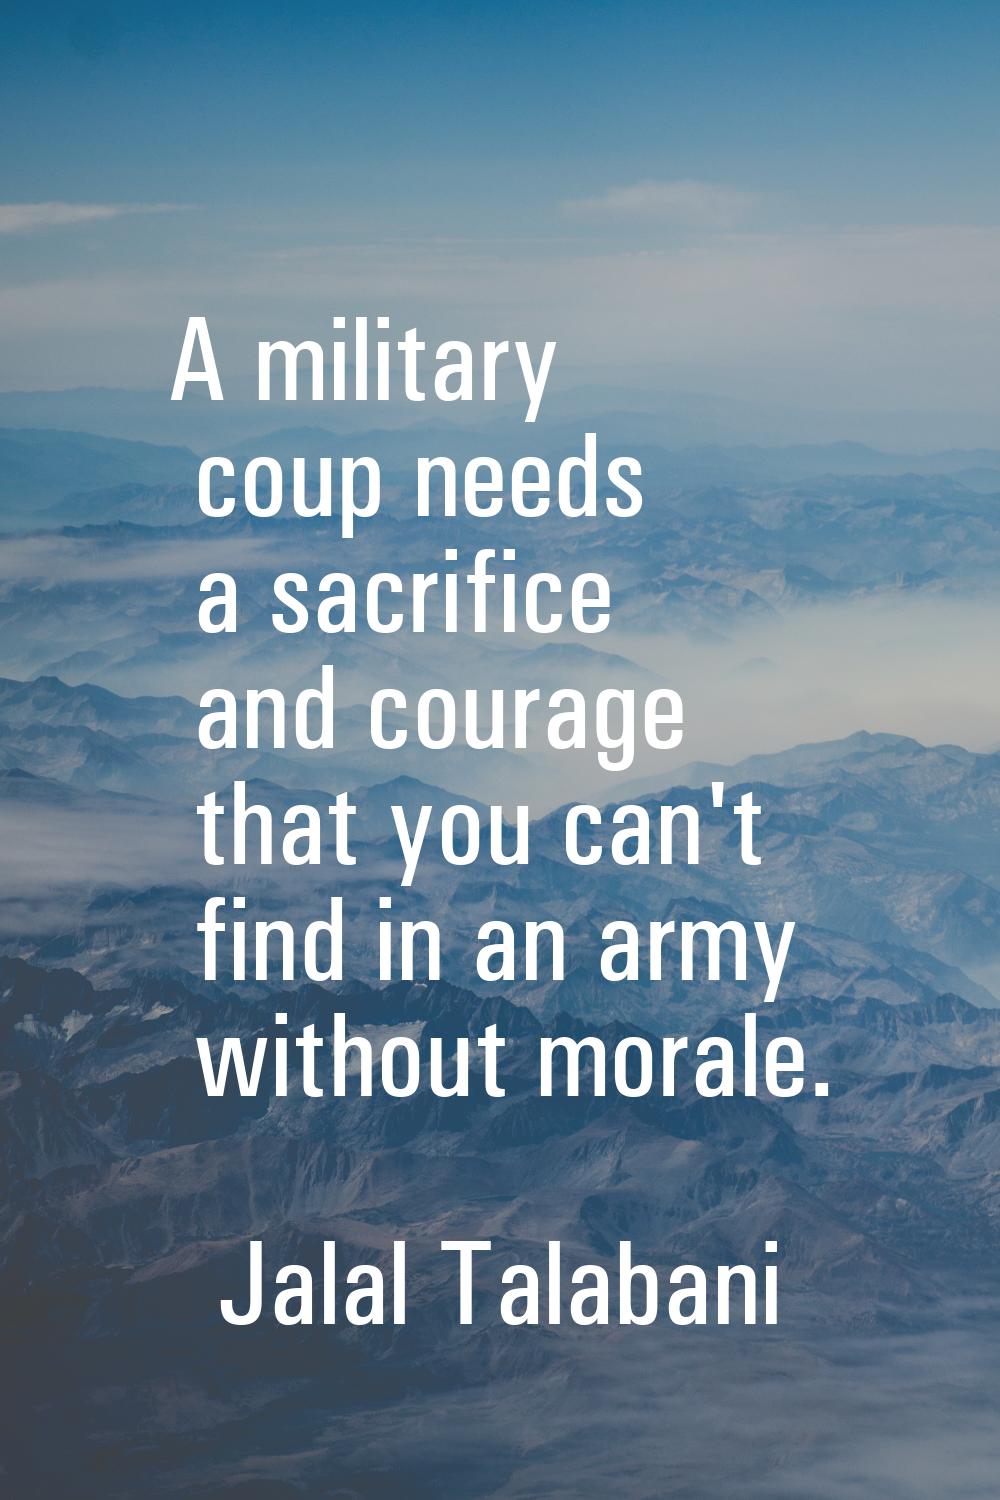 A military coup needs a sacrifice and courage that you can't find in an army without morale.